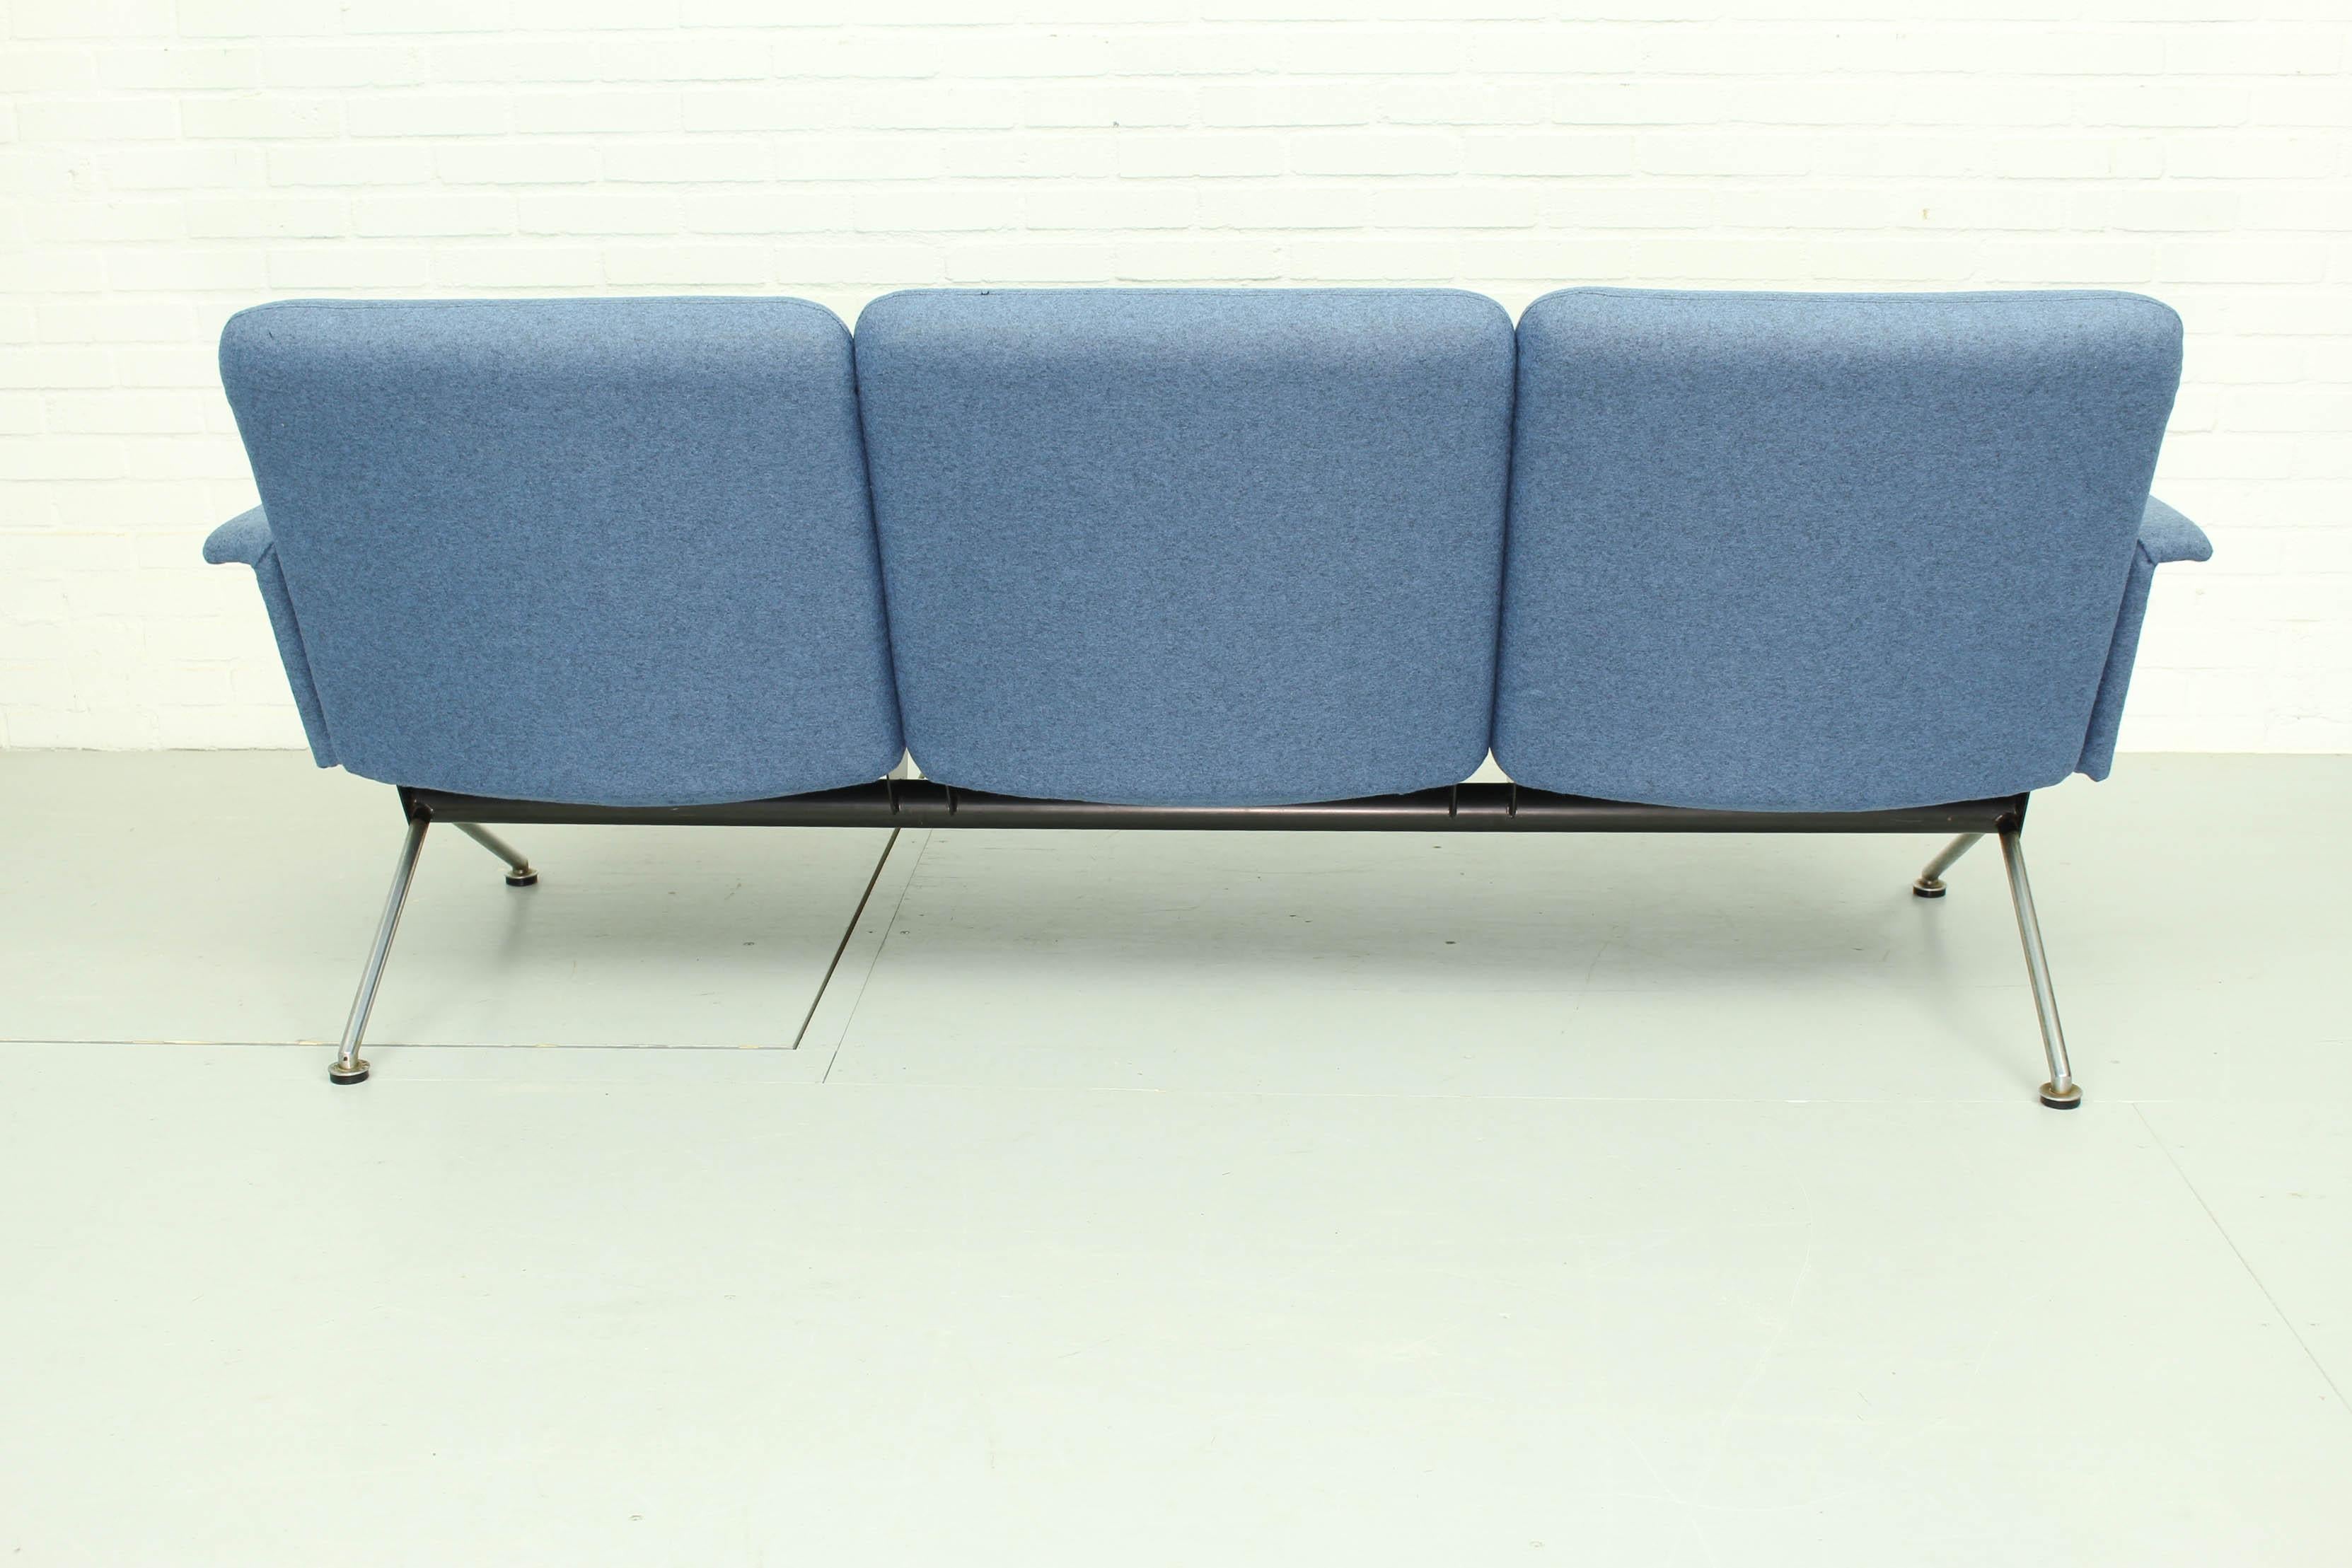 20th Century Lounge Set by Andre Cordemeyer for Gispen, 1432 '2x' and 1715, 1961